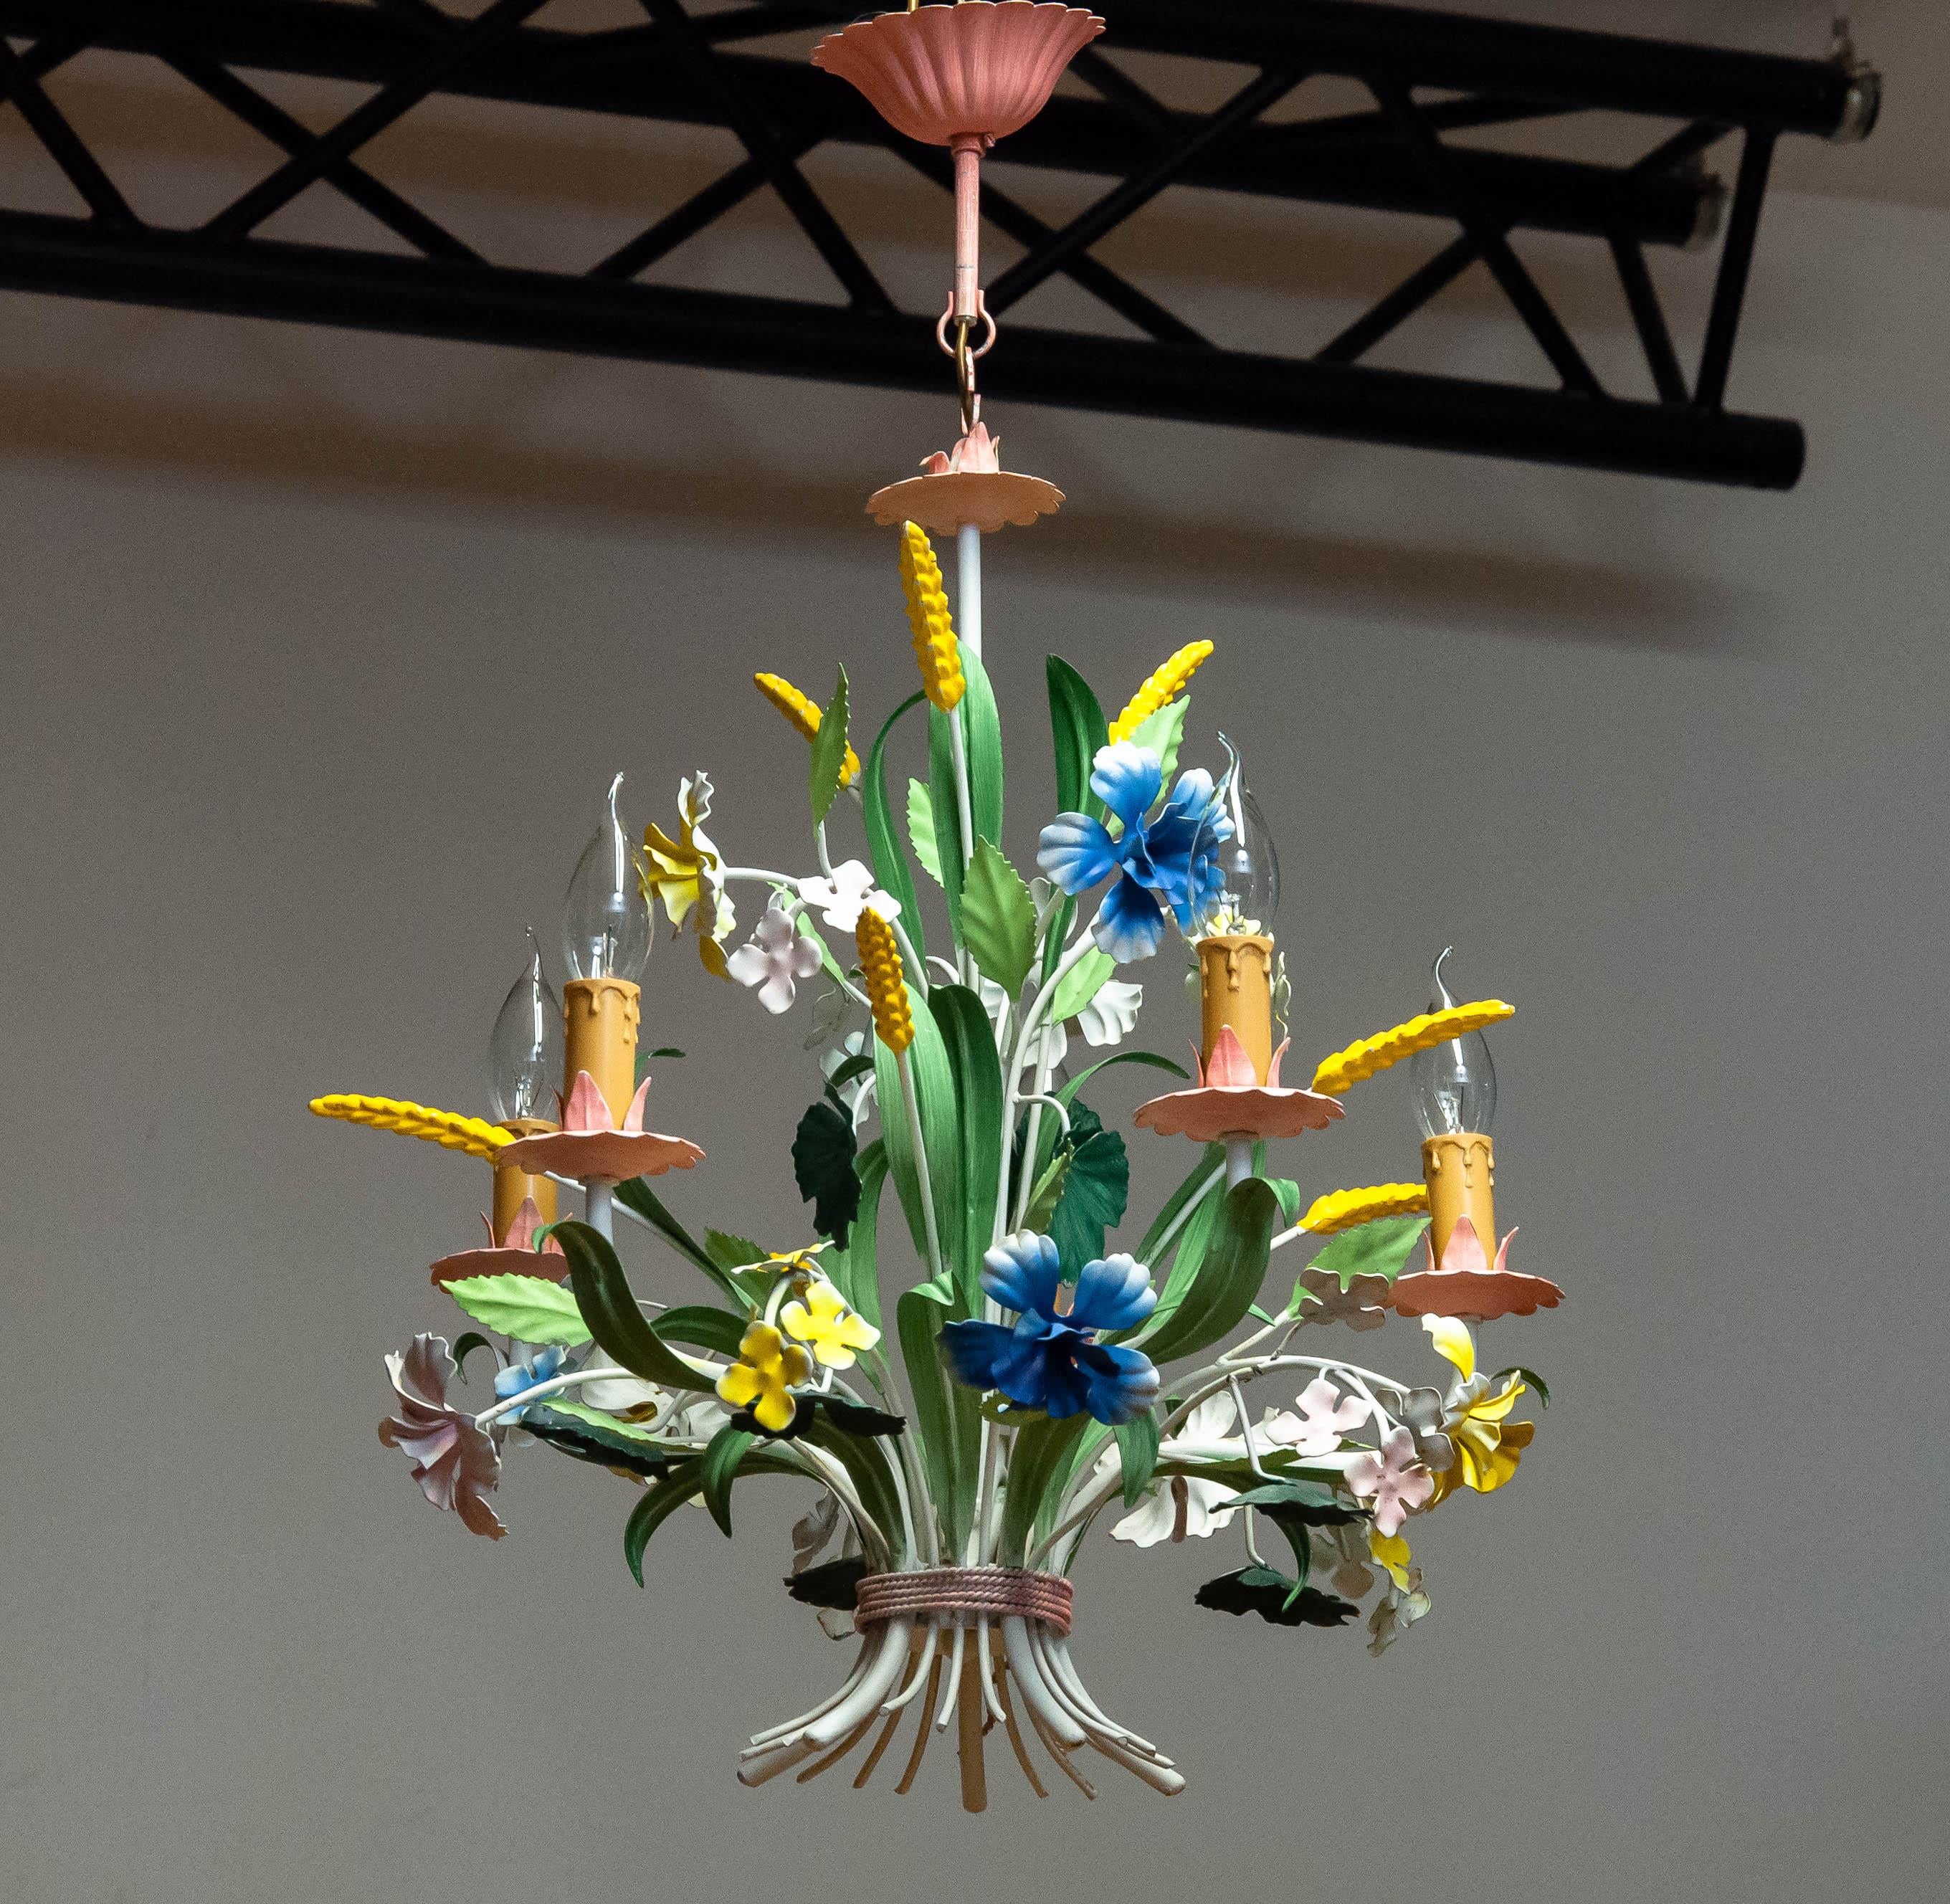 1960s Bright Boho Chic Italian Tole Painted Metal Chandelier With Floral Decor For Sale 4